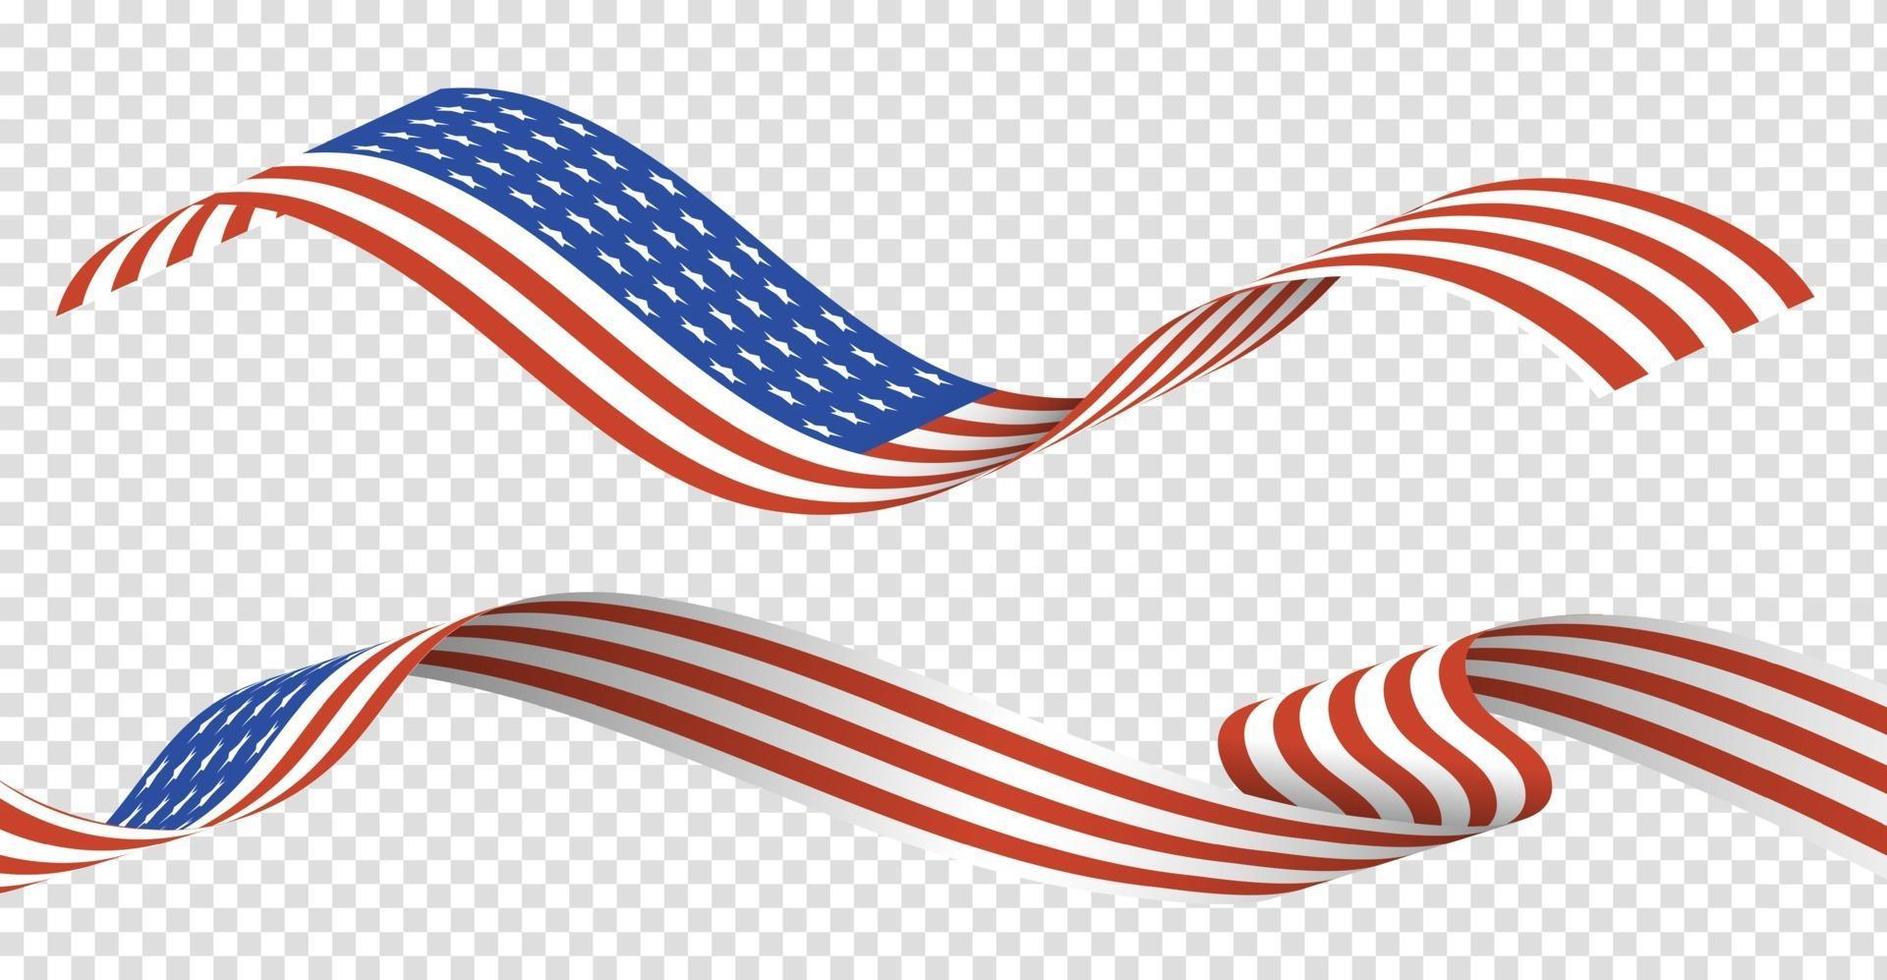 4th of July background design with realistic lovely elements. EPS10 vector illustration.